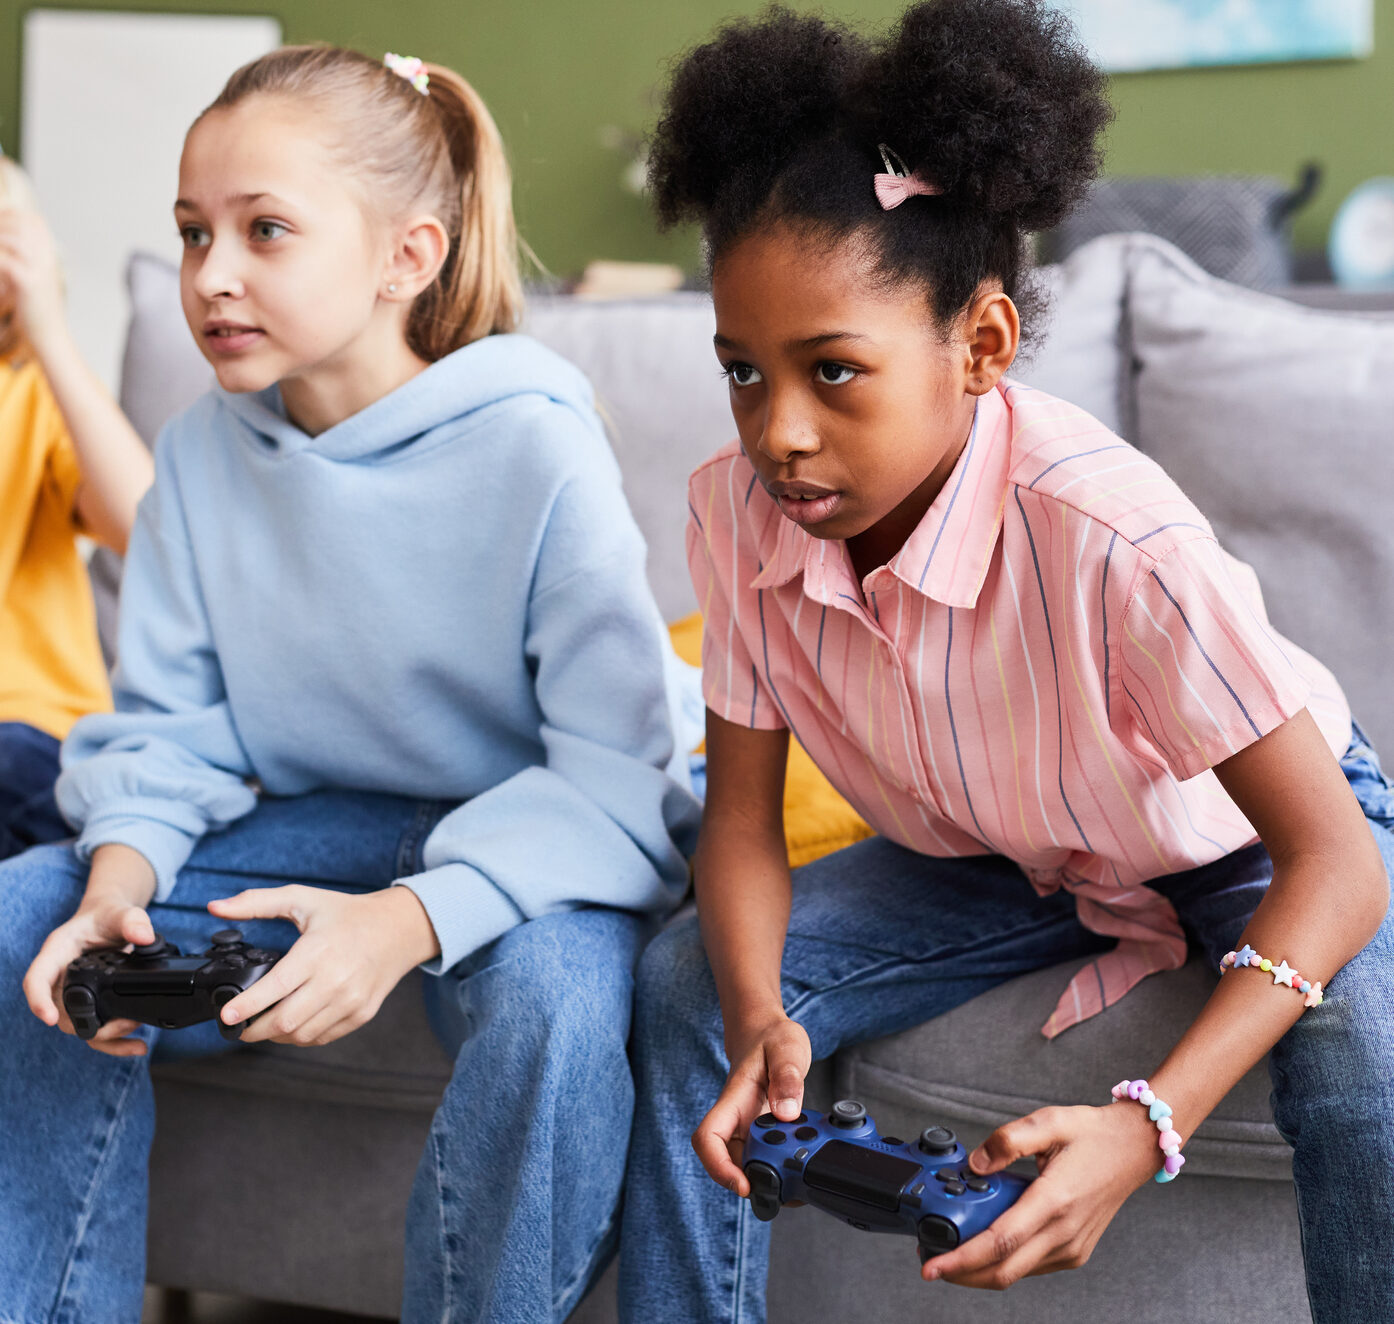 8 Best Computer Games for Kids - Parents Should Know in 2023